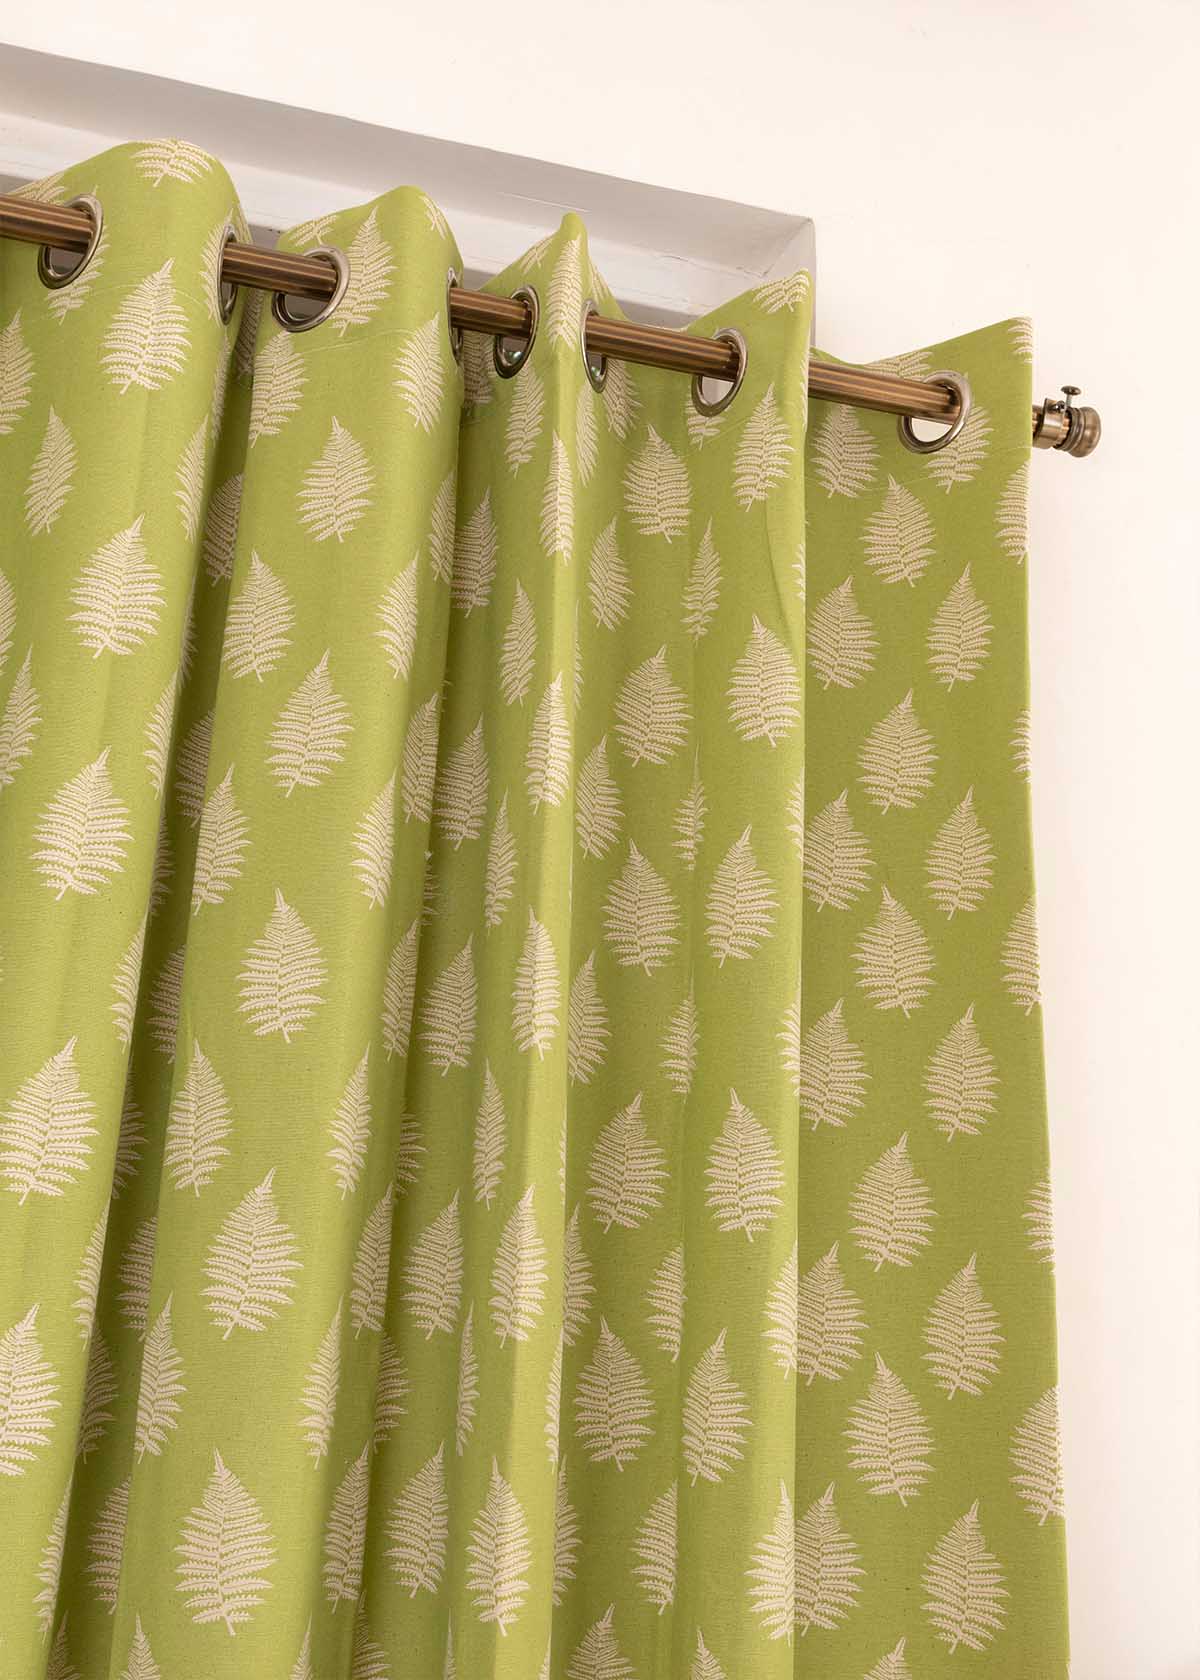 Ferns 100% cotton floral curtain for living room - Room darkening - Green - Pack of 1